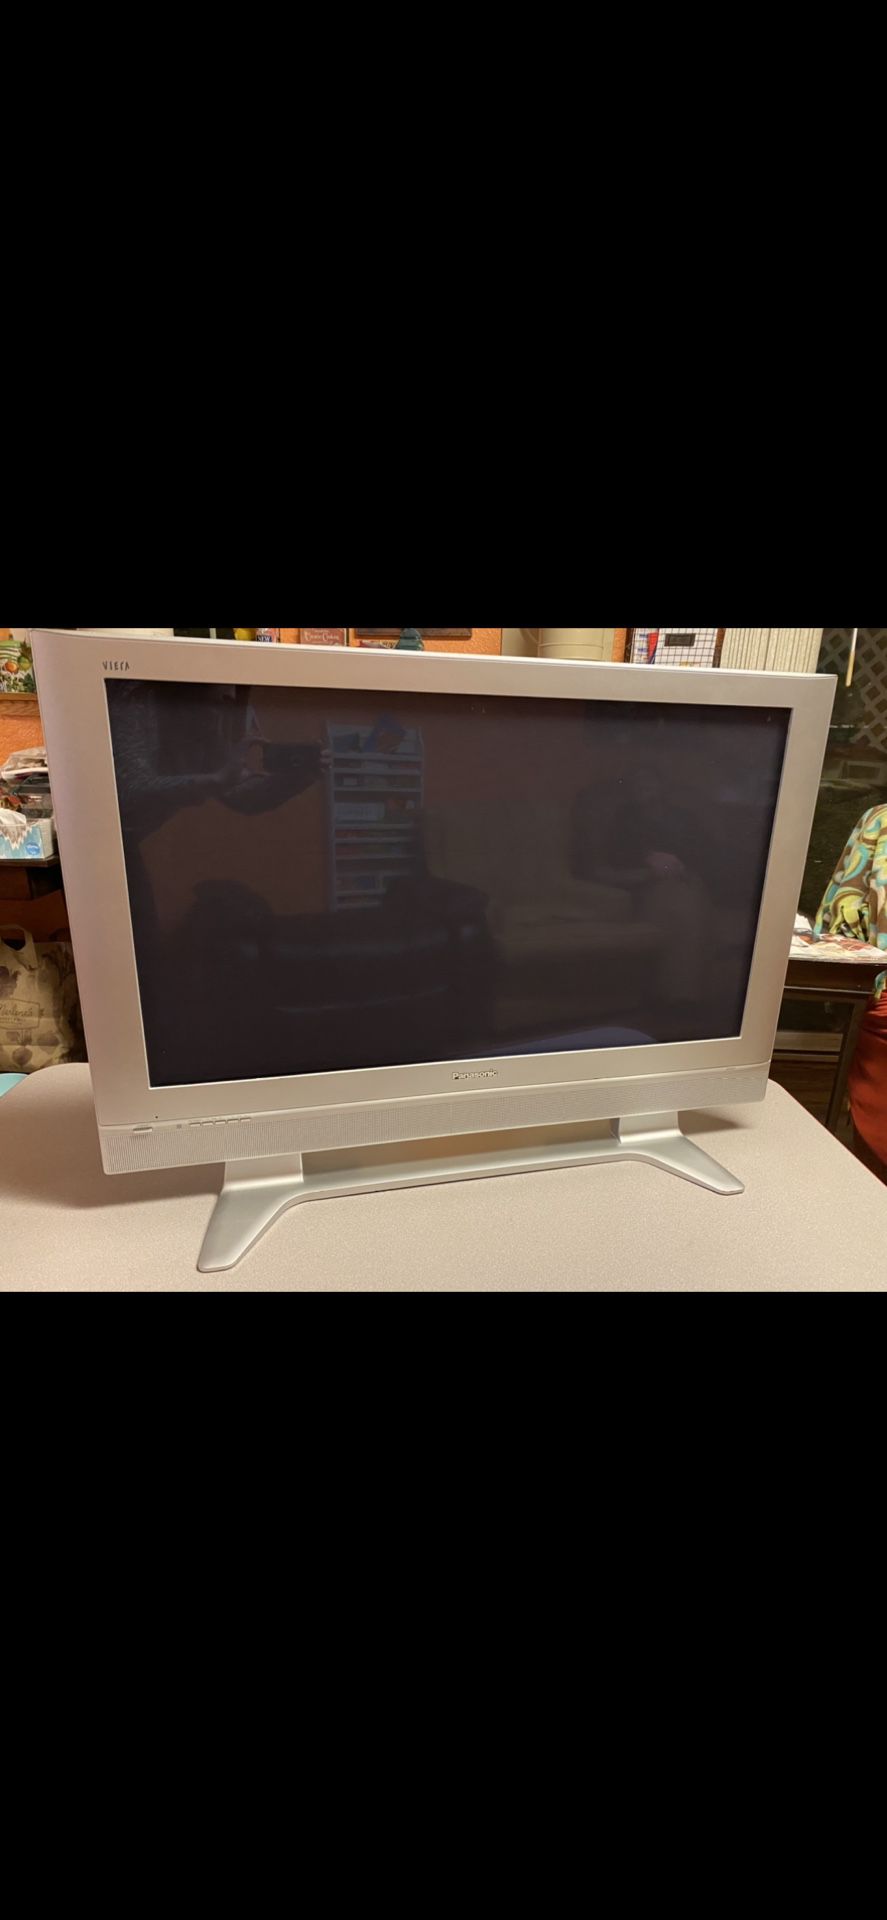 42” Panasonic TV with remote and HDMI